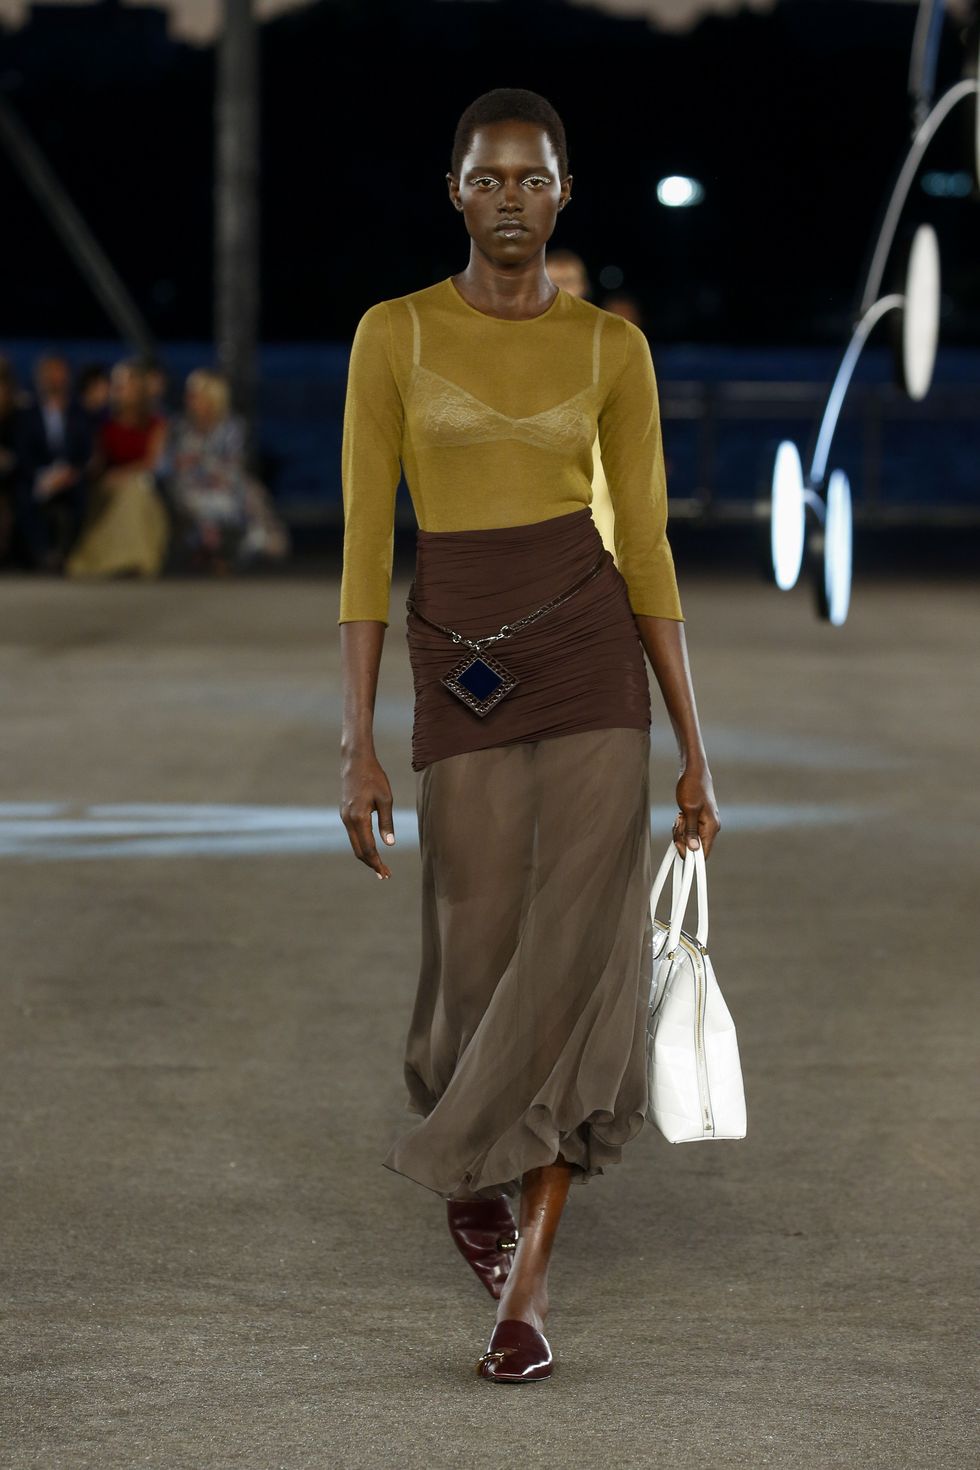 https://hips.hearstapps.com/hmg-prod/images/model-walks-the-runway-during-the-tory-burch-ready-to-wear-news-photo-1680881830.jpg?resize=980:*